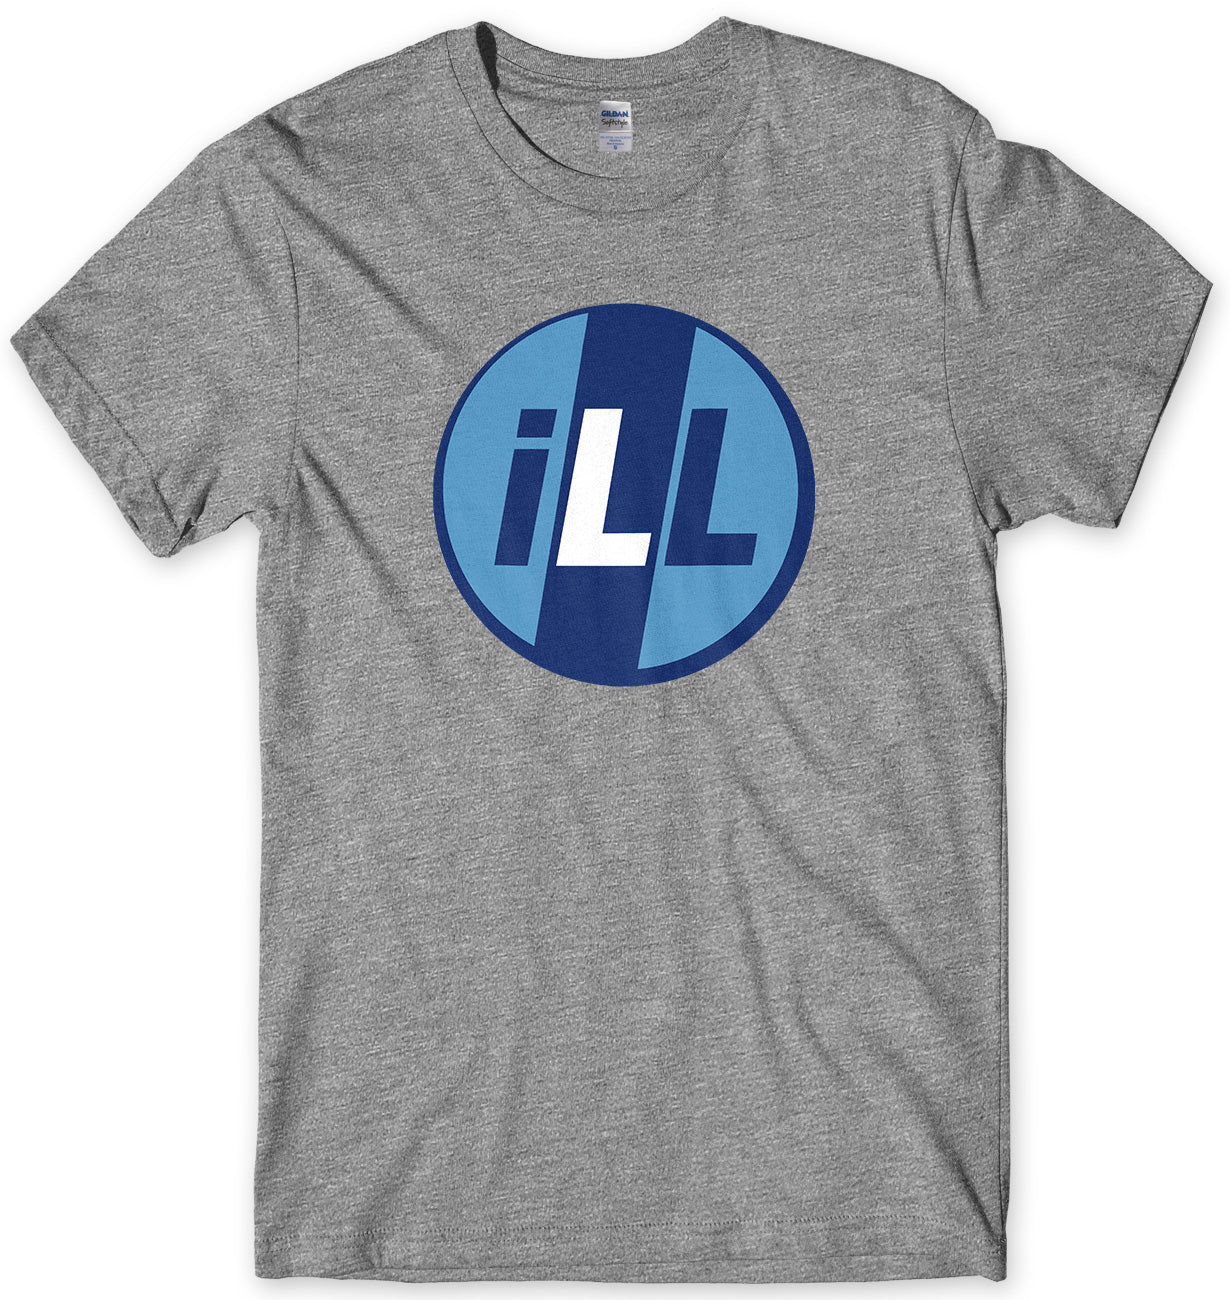 ILL LOGO AS WORN BY MIKE D MENS UNISEX T-SHIRT